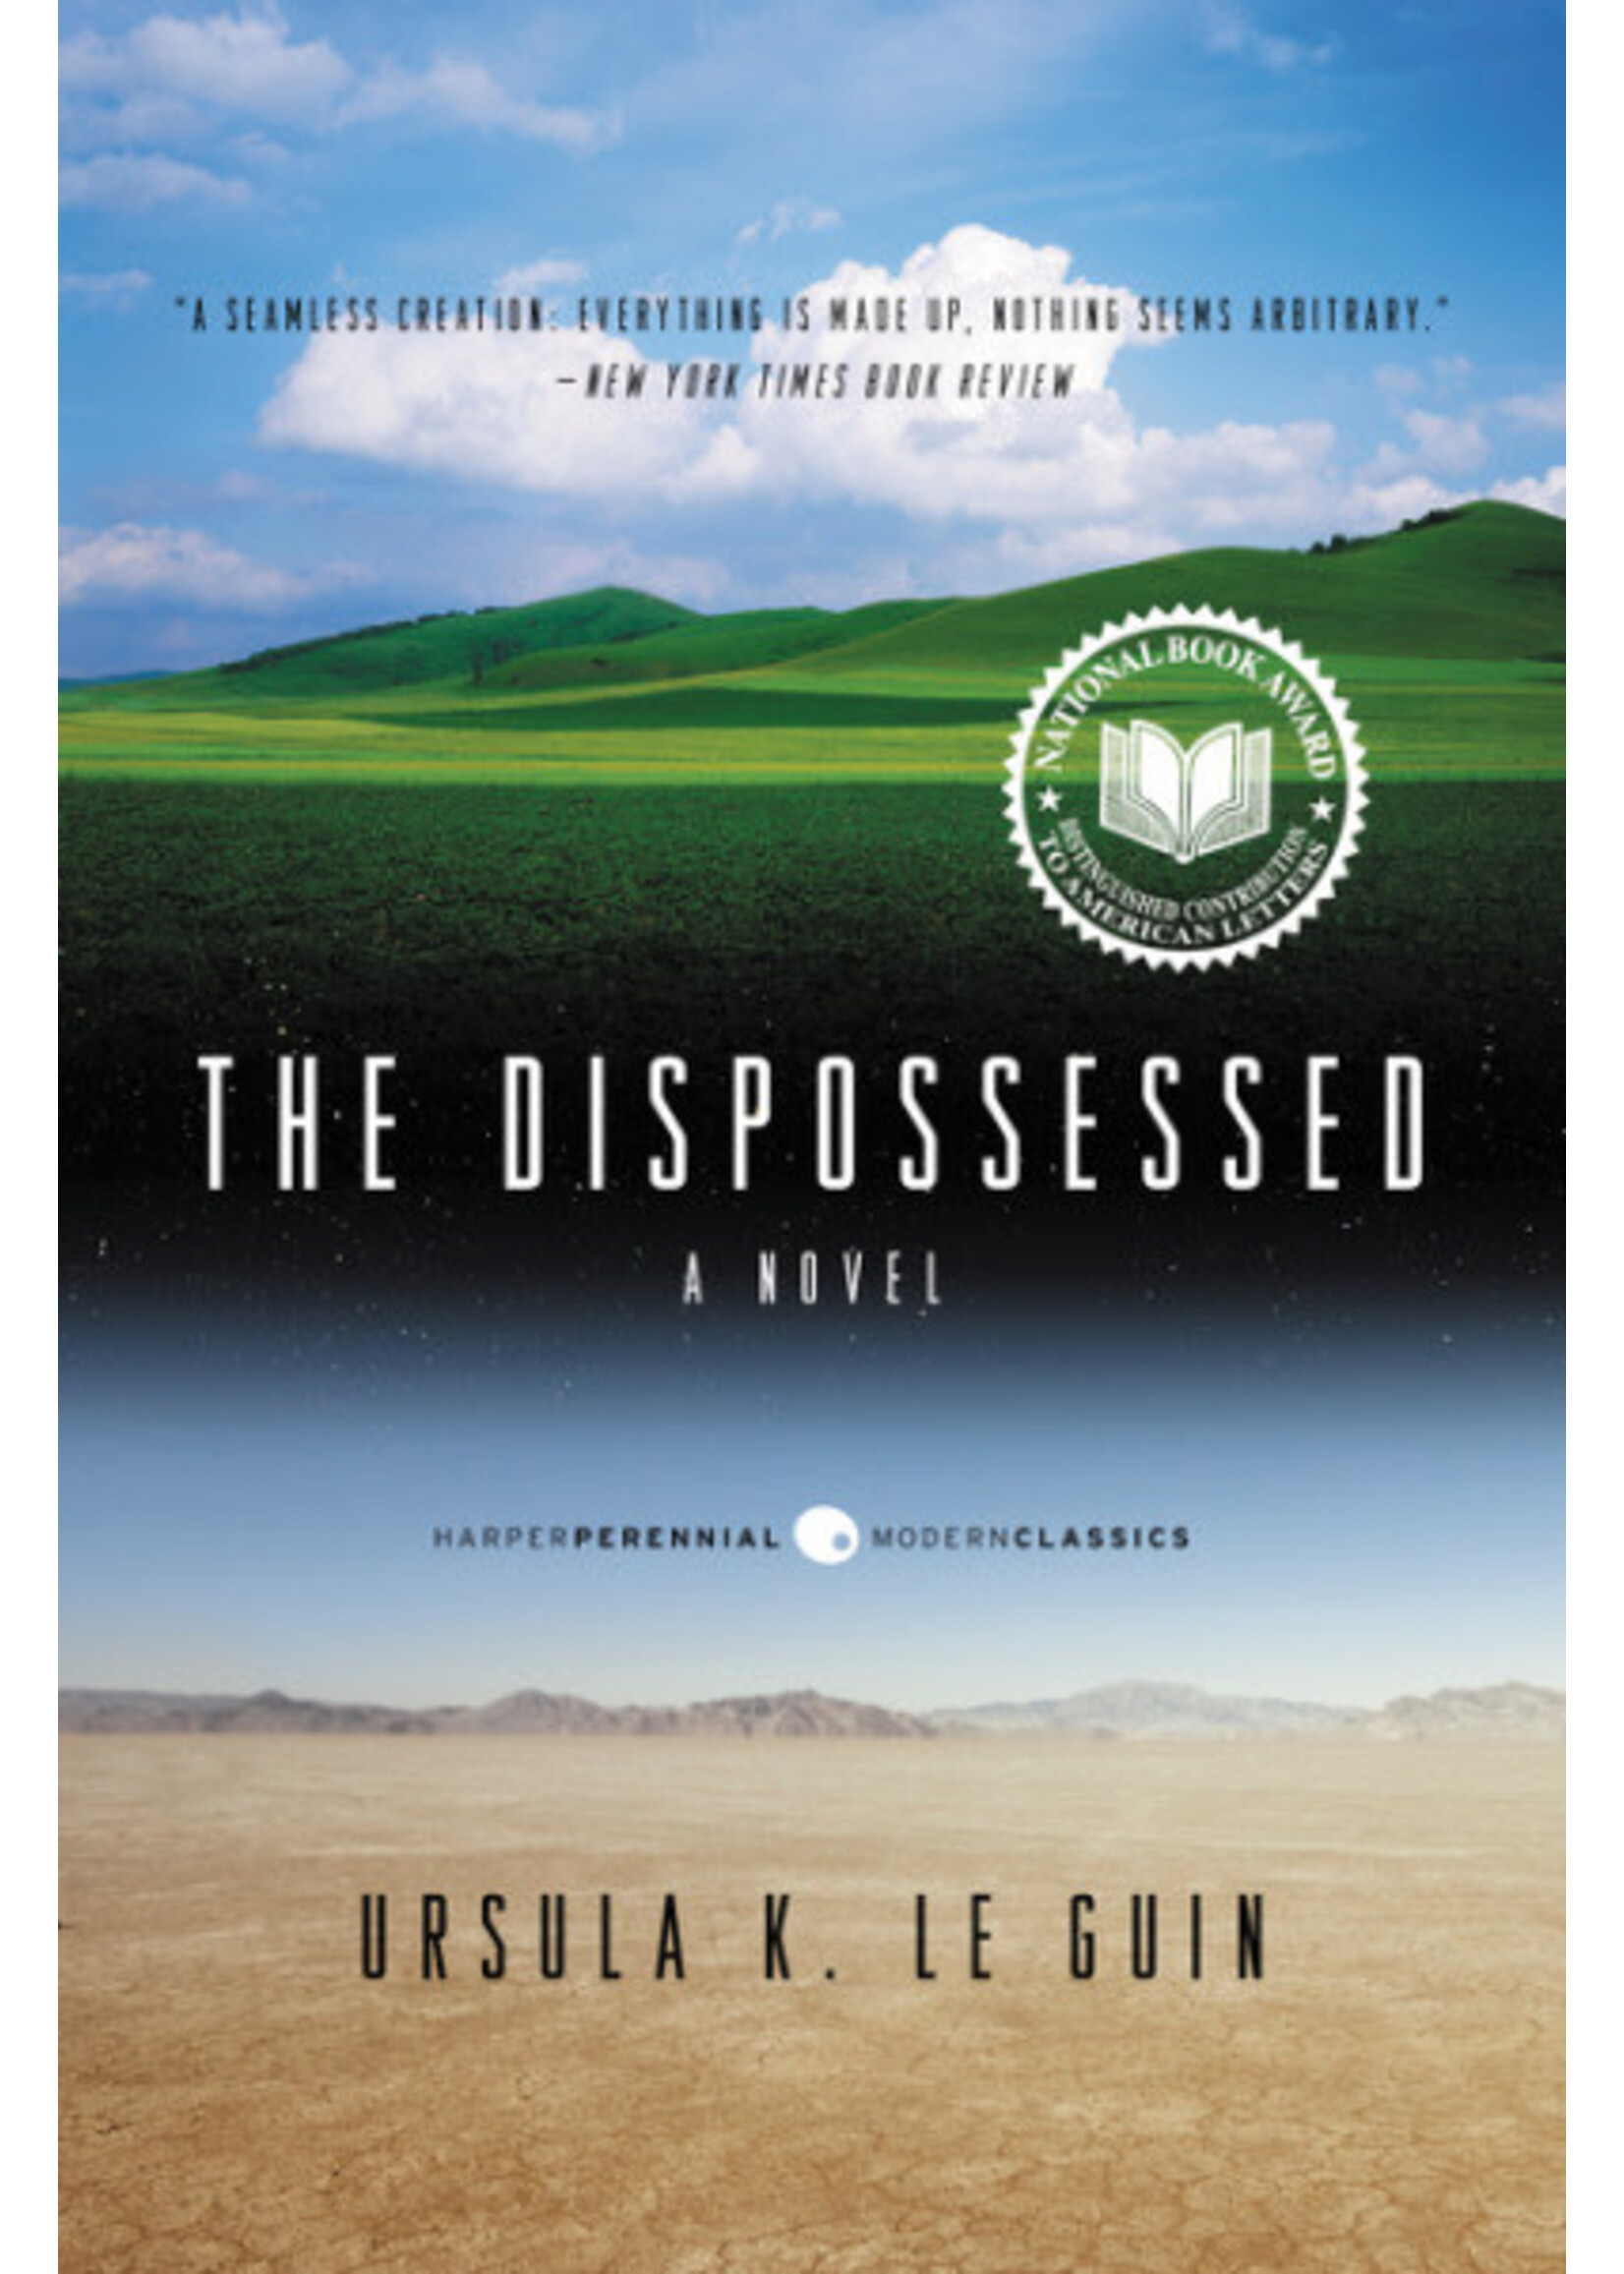 The Dispossessed (Hainish Cycle #6) by Ursula K. Le Guin